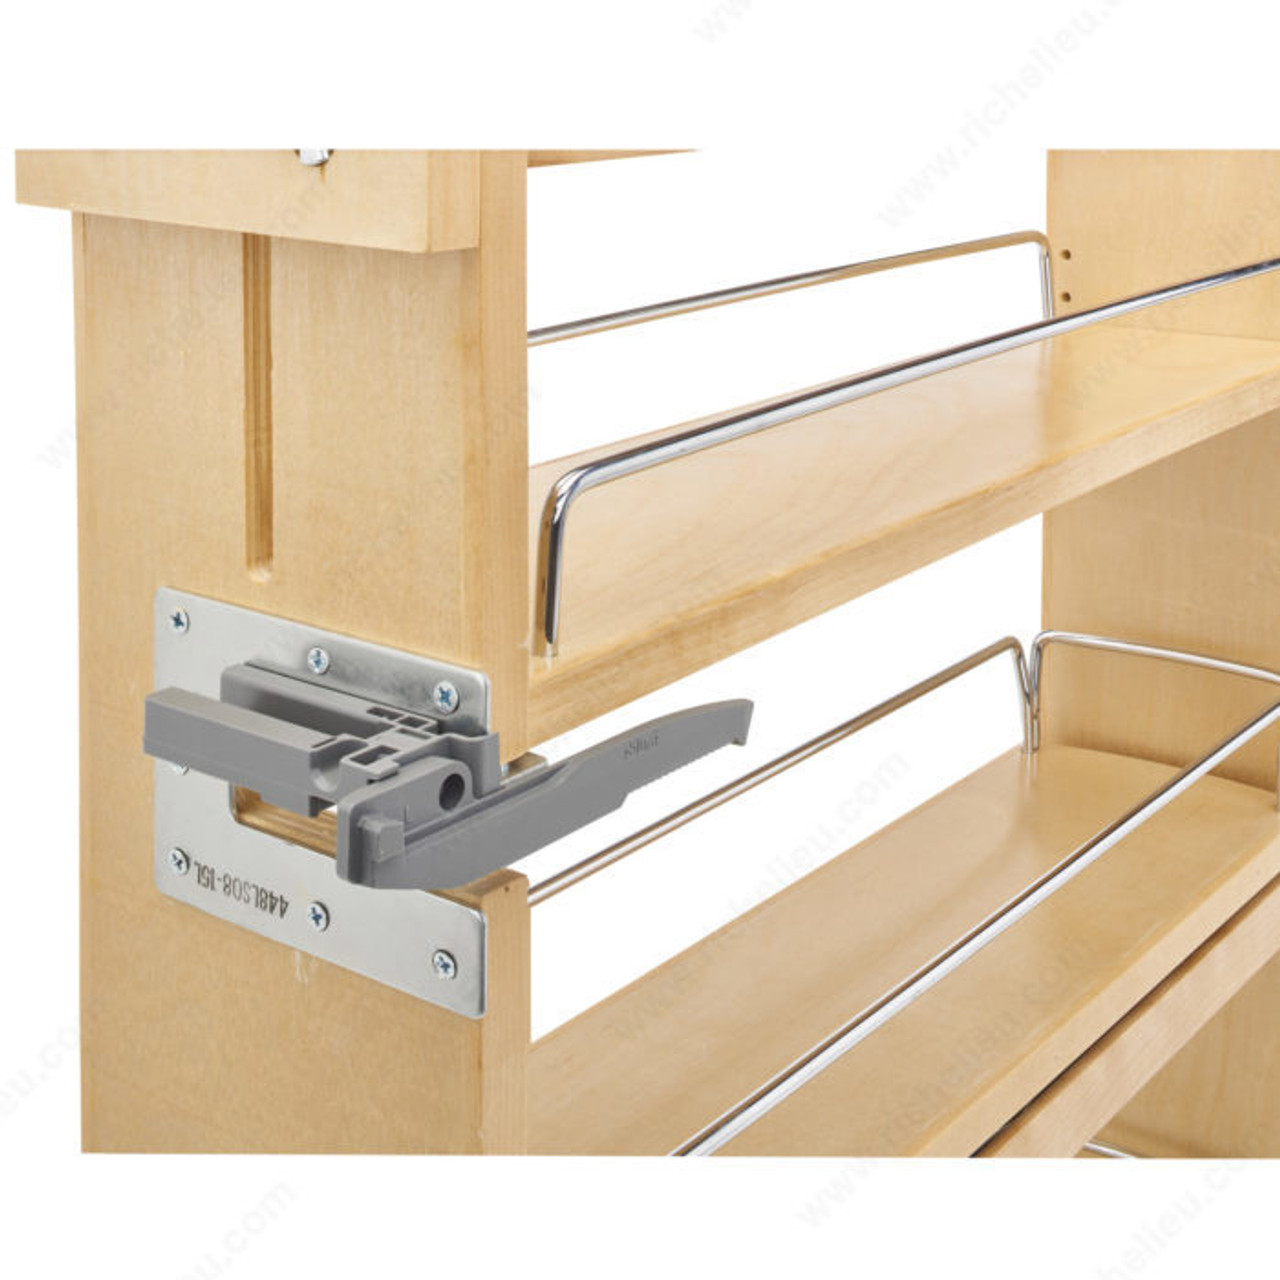 448-BCSC-8C Wood Sliding Storage System For Base Cabinets That Integrates  The Blum Slide With A Soft-Closing Mechanism - Express Kitchens